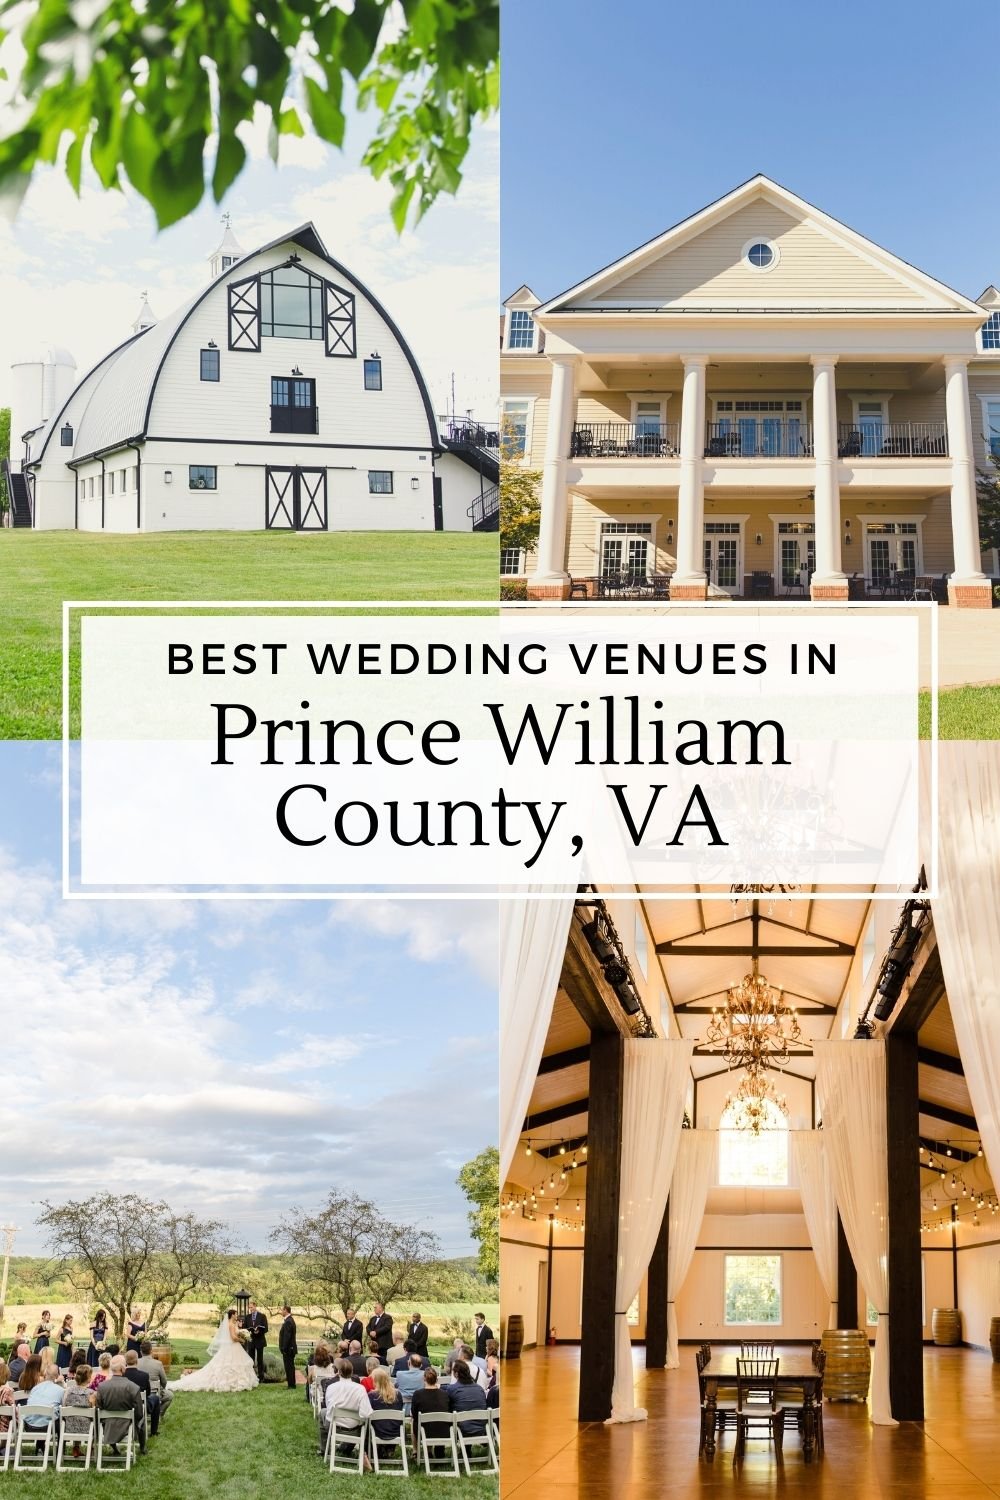 Best wedding venues in Prince William County